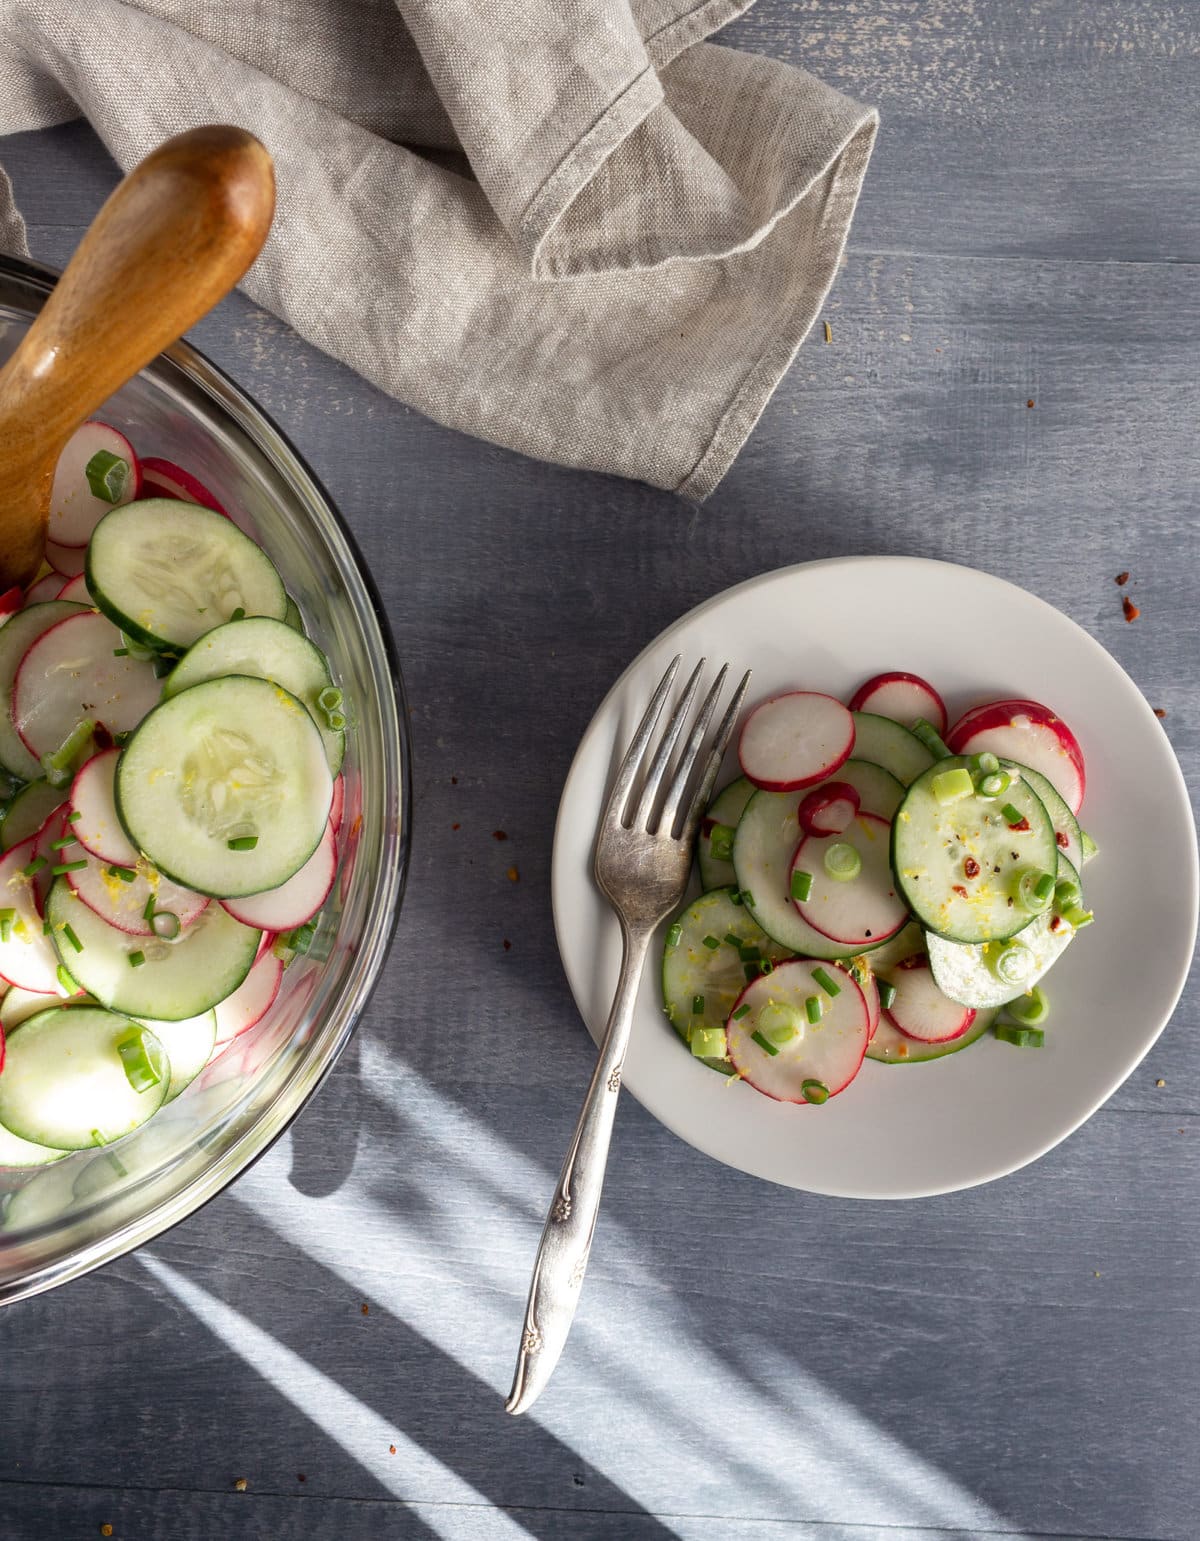 Bowl of cucumber salad with some on a plate